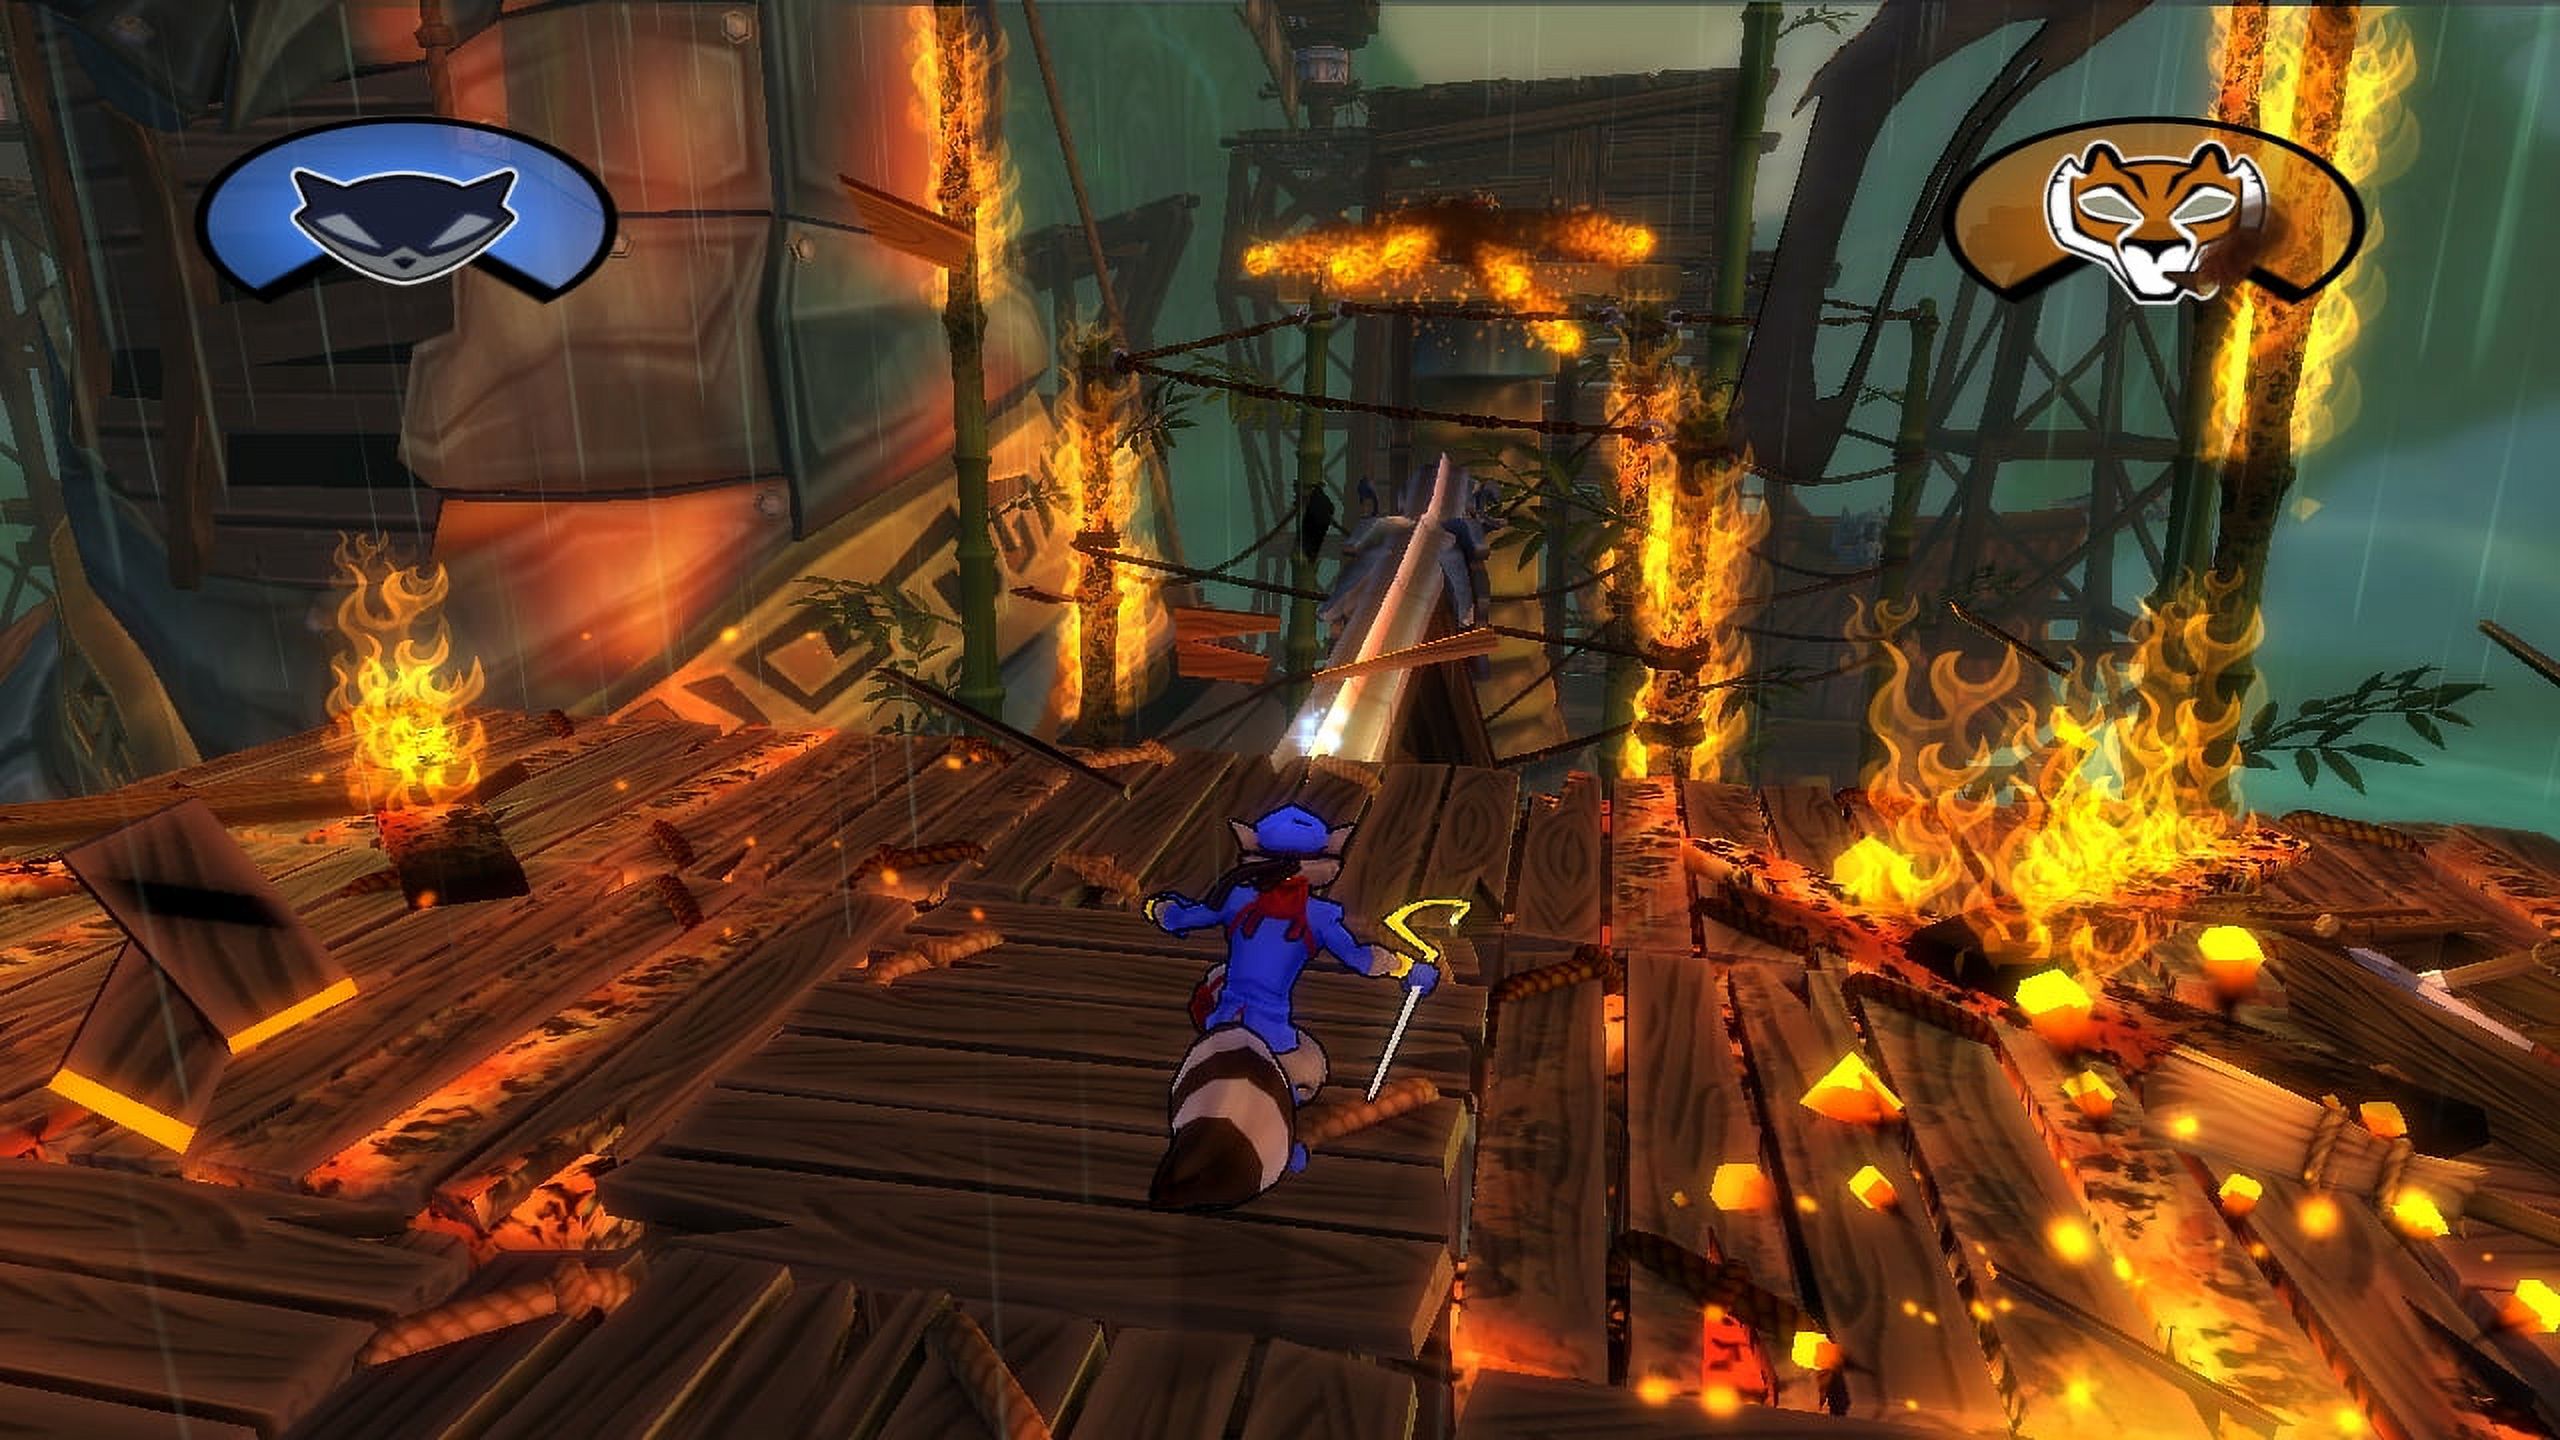 Sly Cooper: Thieves In Time [PS Vita Cross Buy], Sony, PlayStation 3, 711719982470 - image 2 of 41